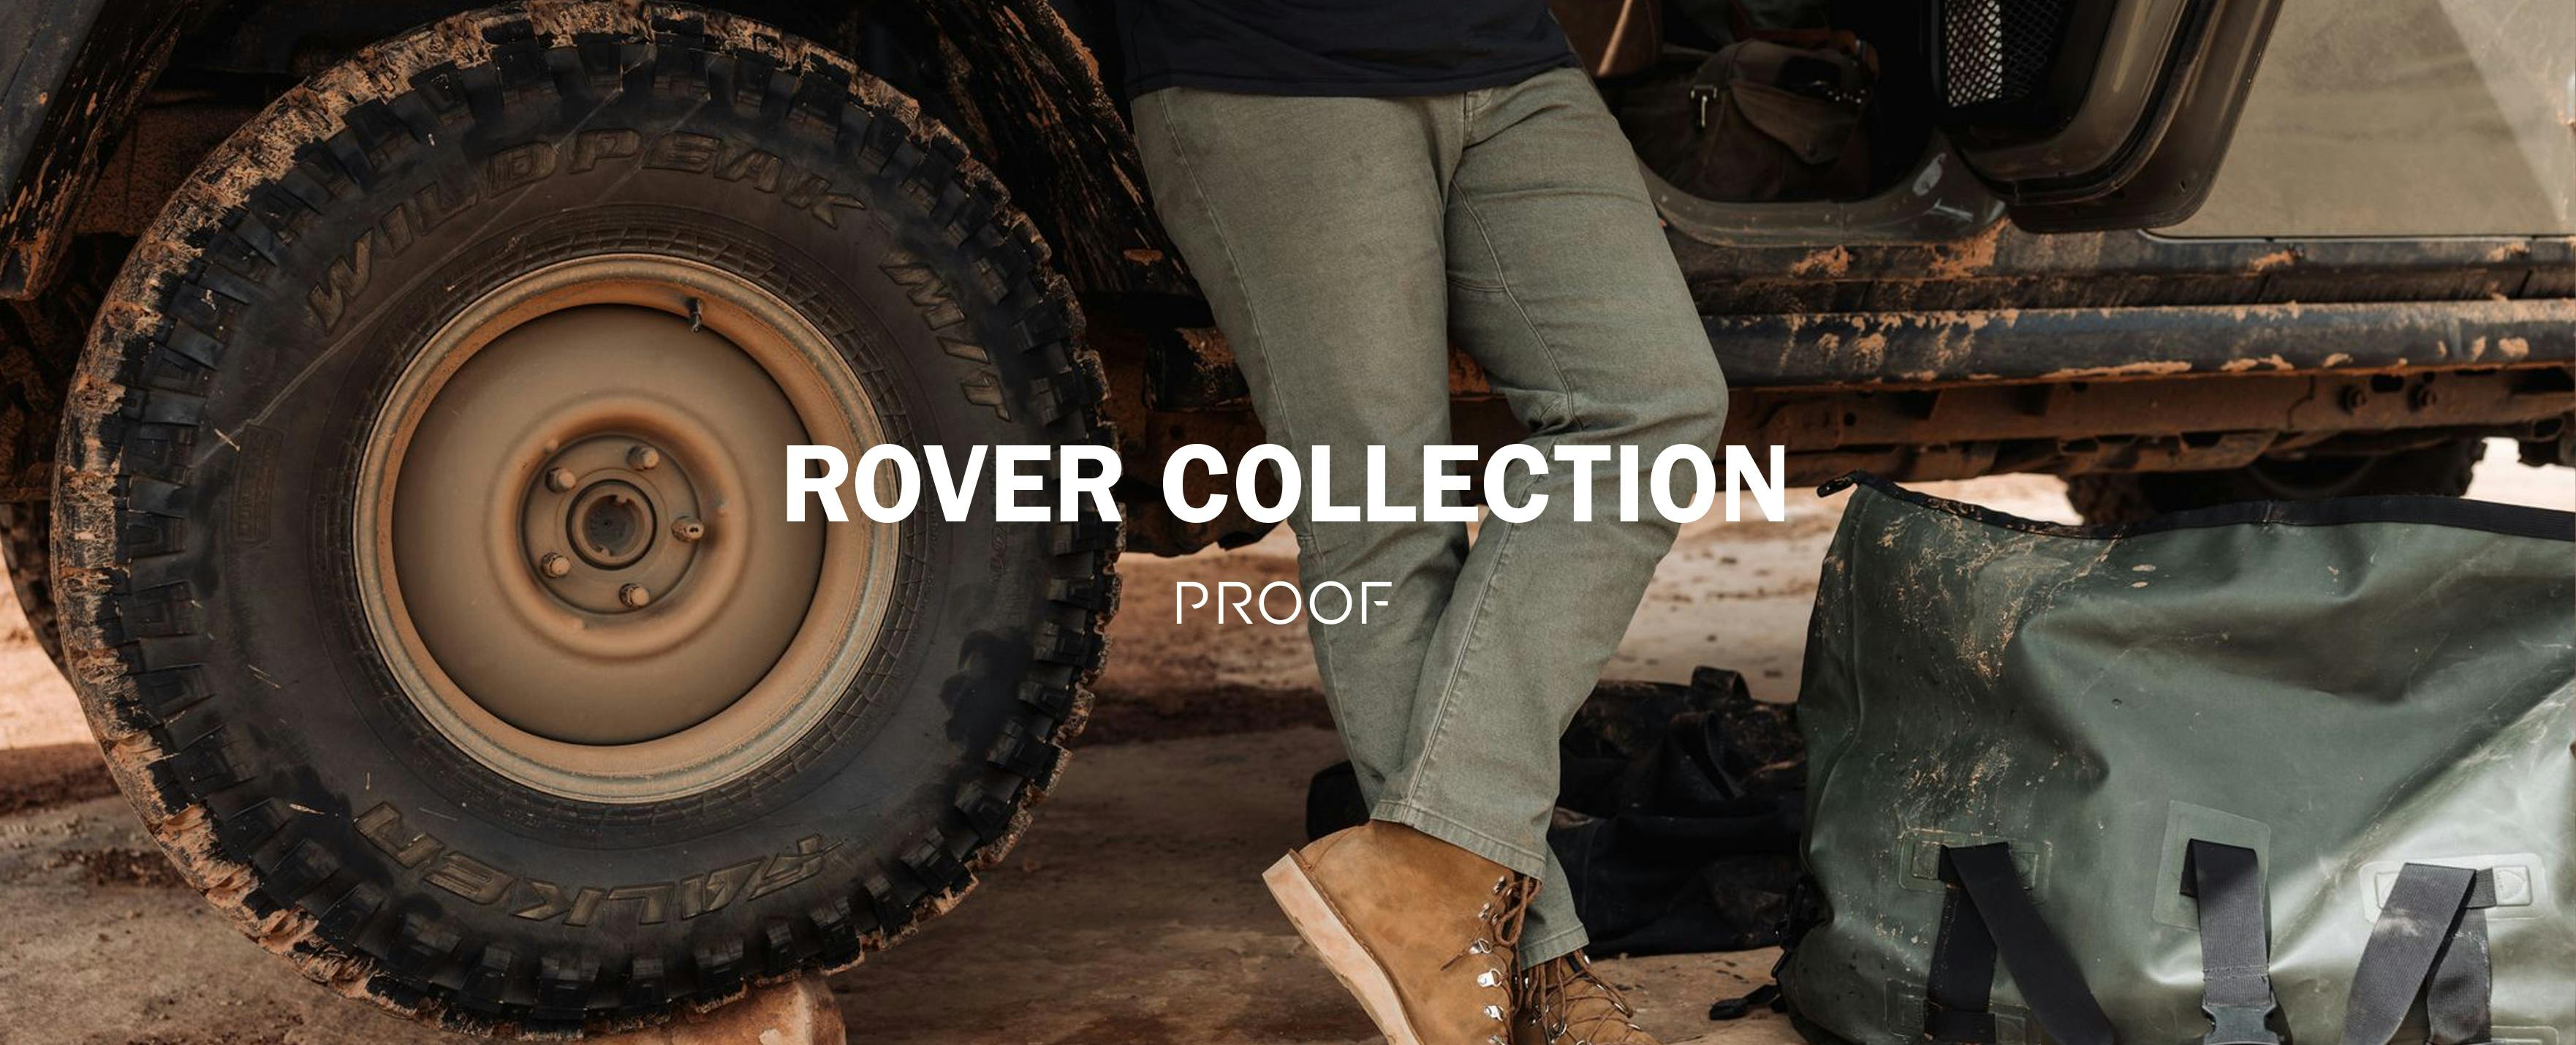 Proof: The Rover Collection